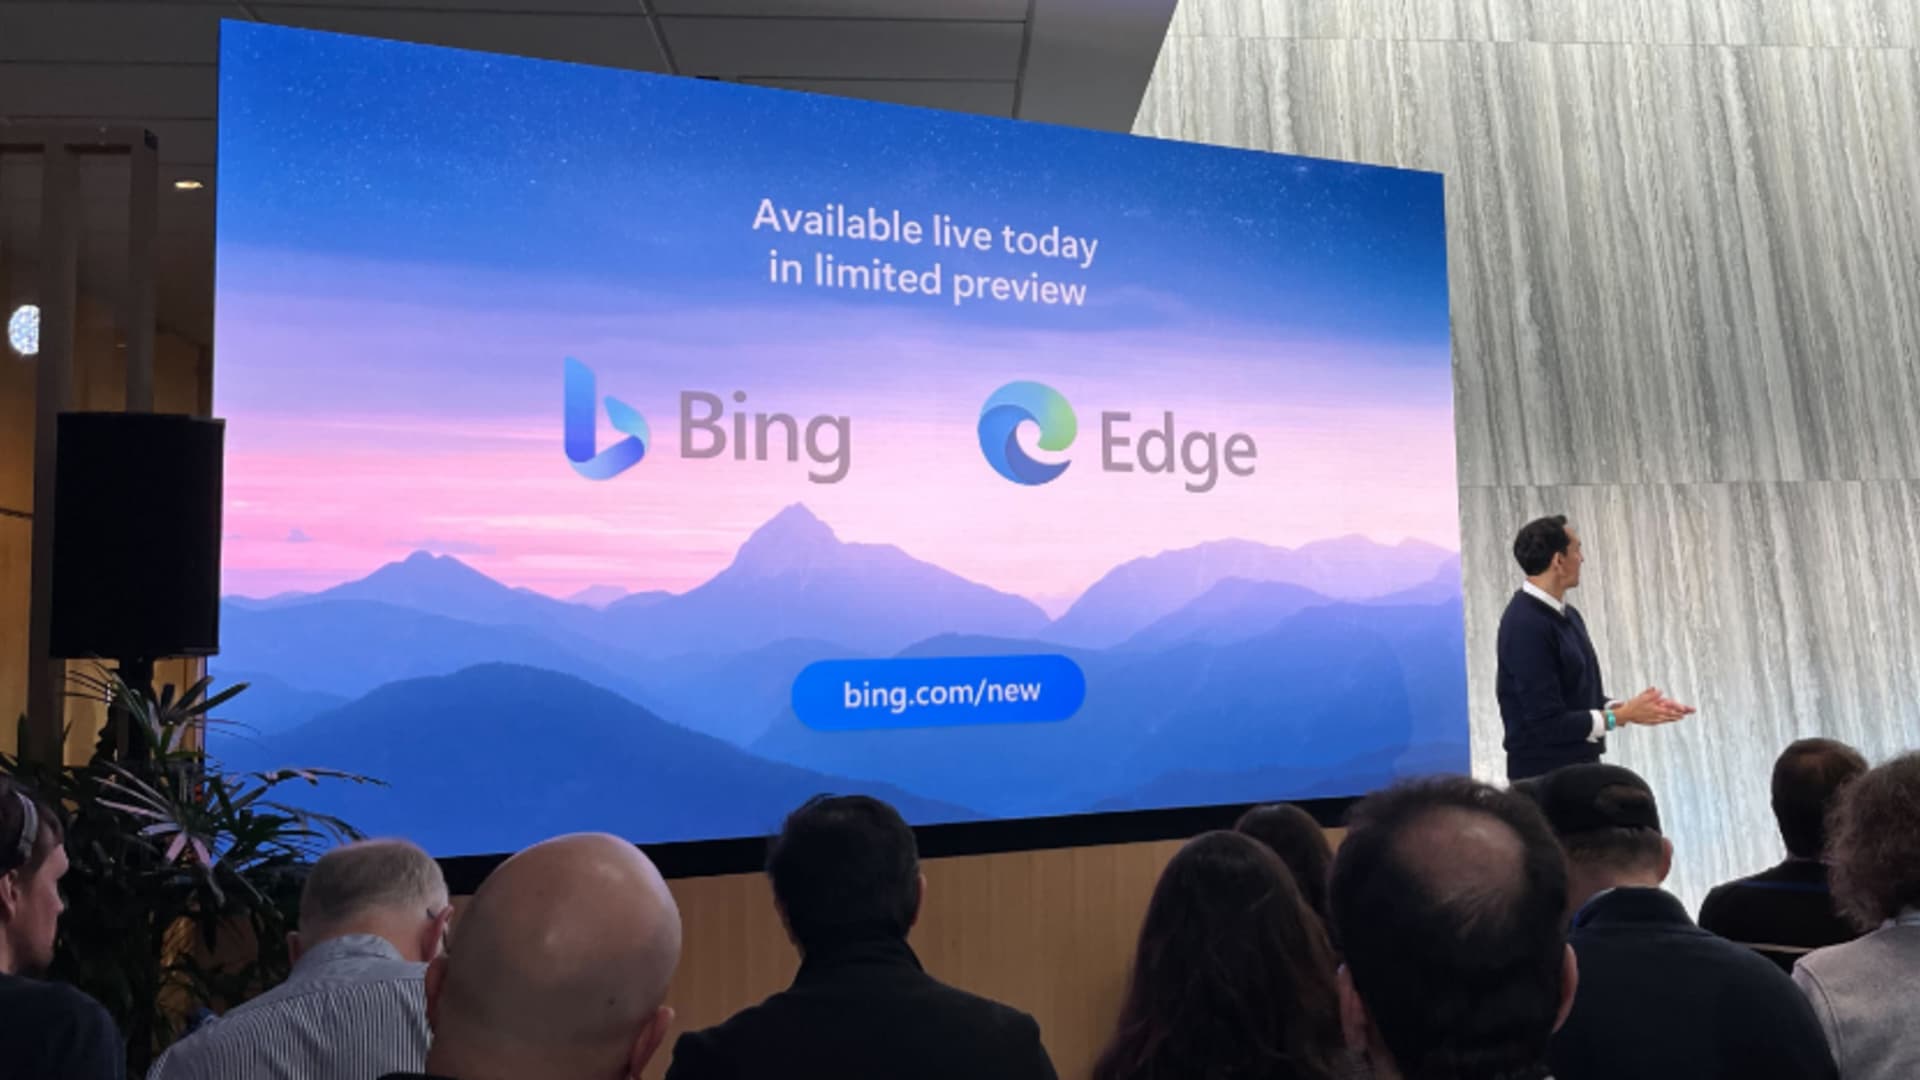 Microsoft limits Bing A.I. chats after the chatbot had some unsettling conversations